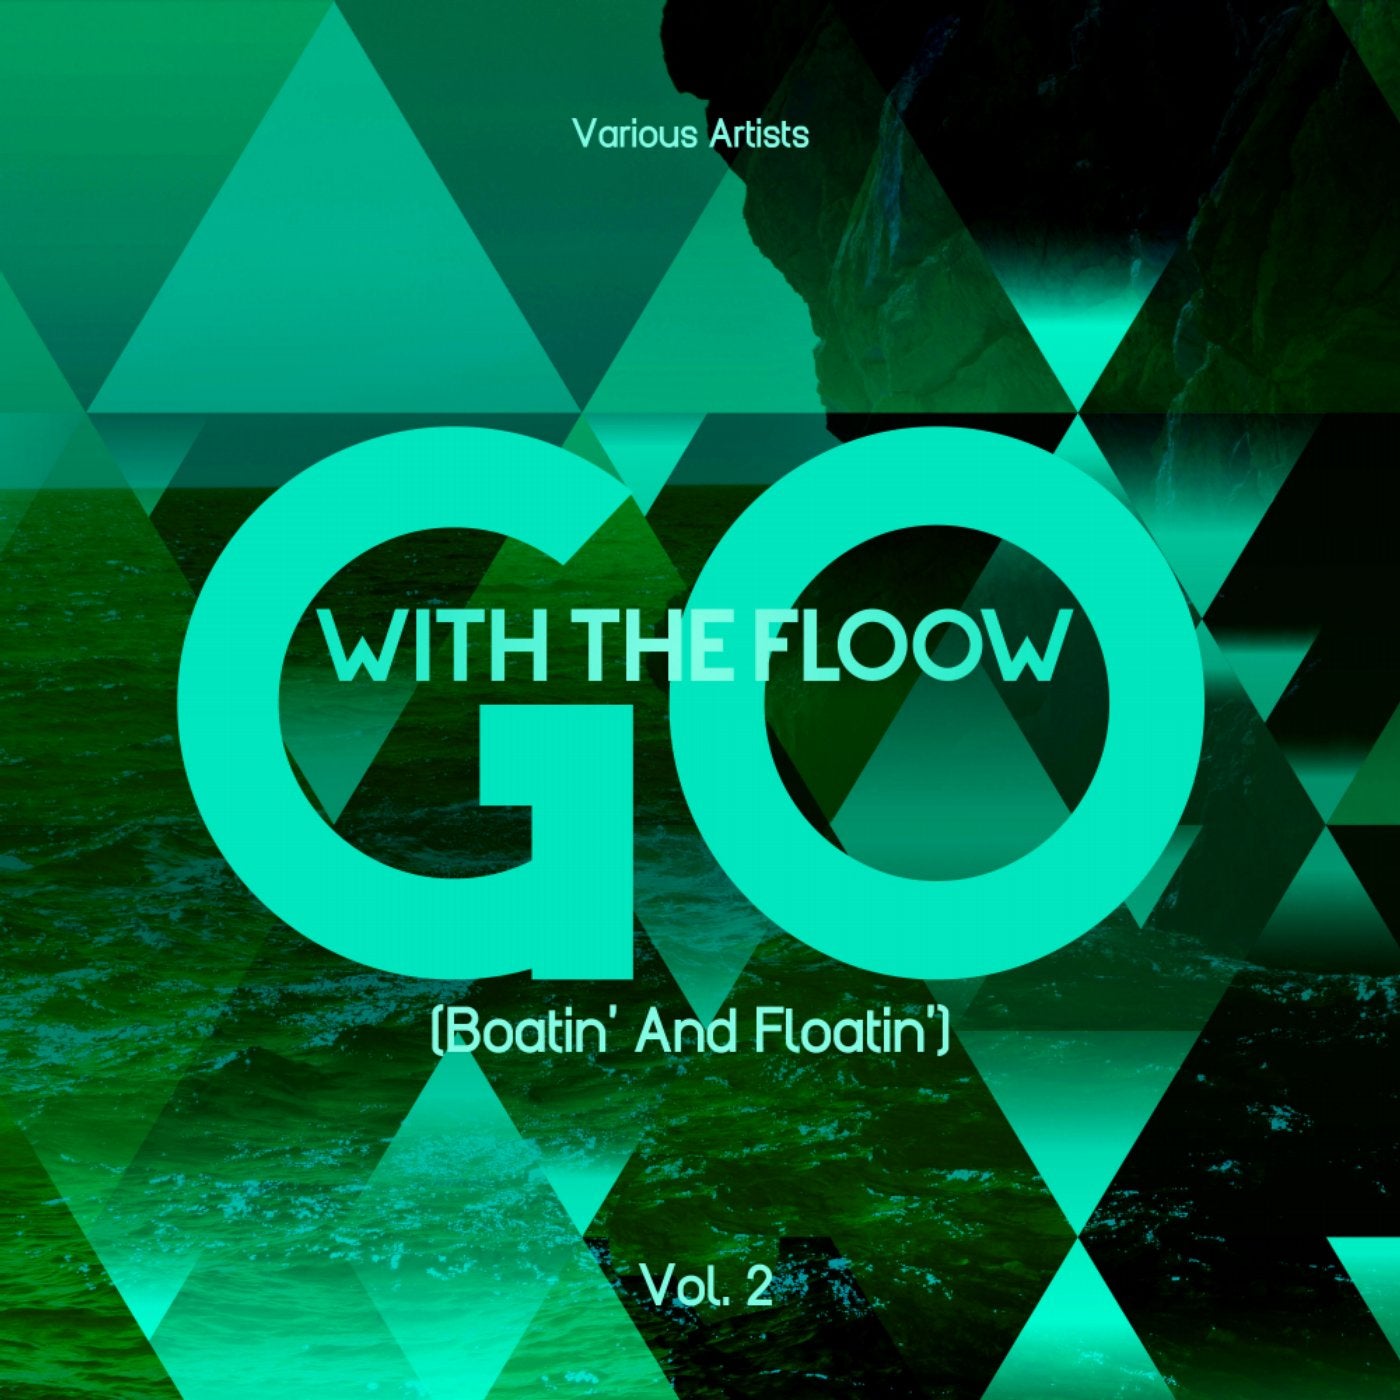 Go with the Flow (Boatin' and Floatin'), Vol. 2